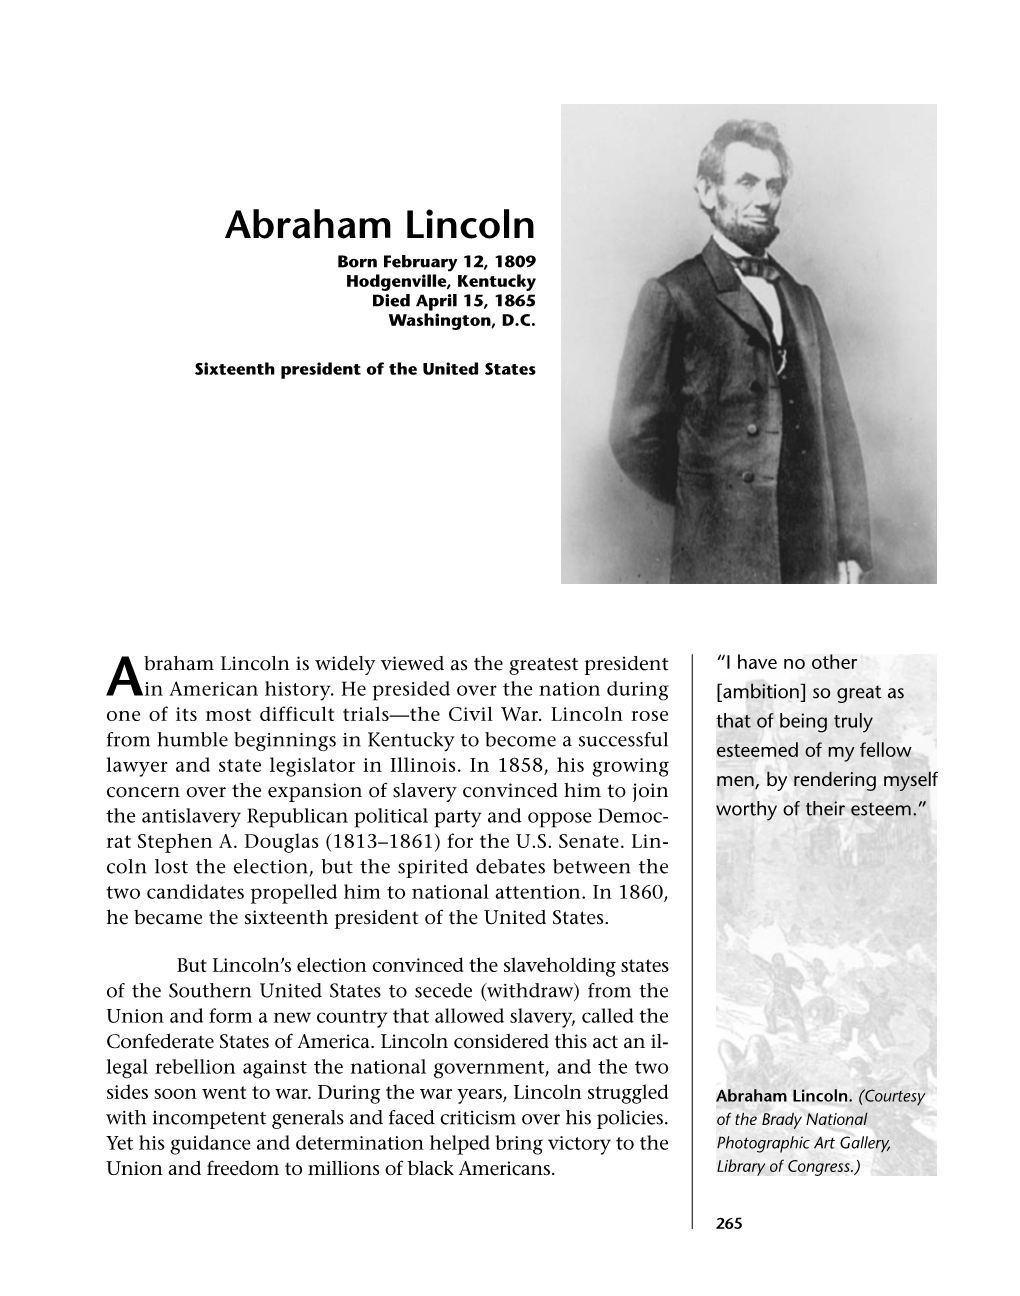 Abraham Lincoln Is Widely Viewed As the Greatest President